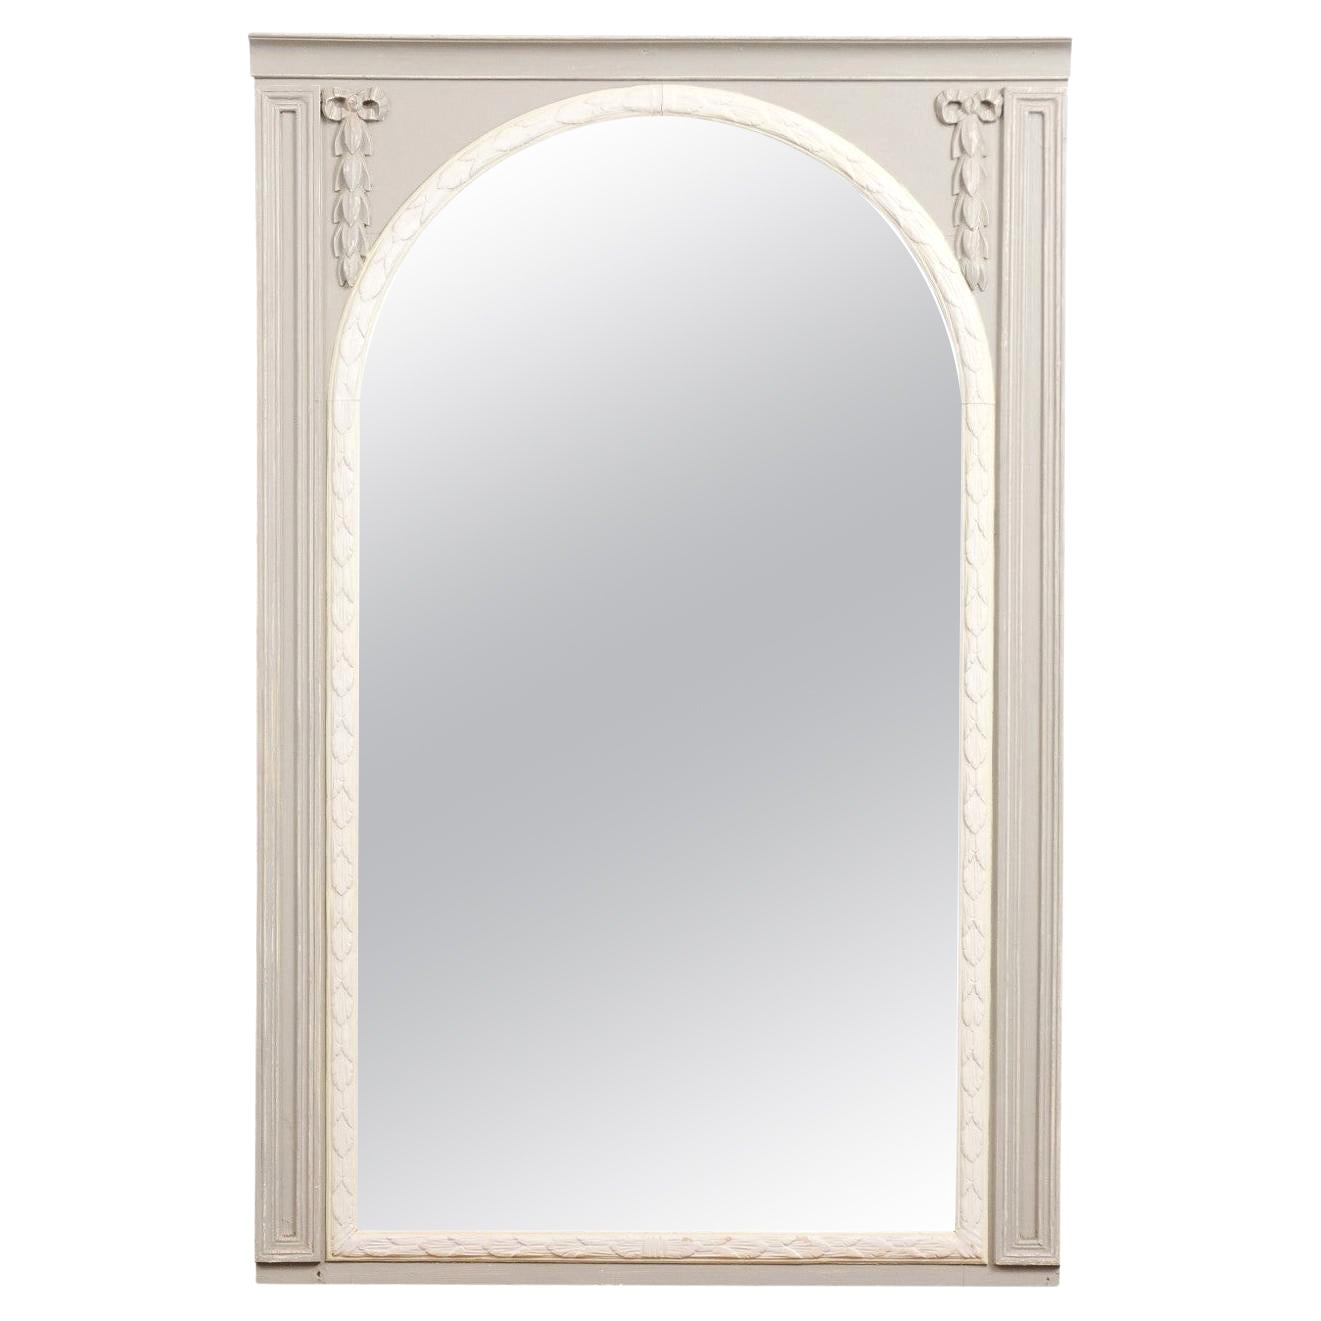 French 1900s Painted Trumeau Mirror with Carved Foliage and Arched Molding For Sale